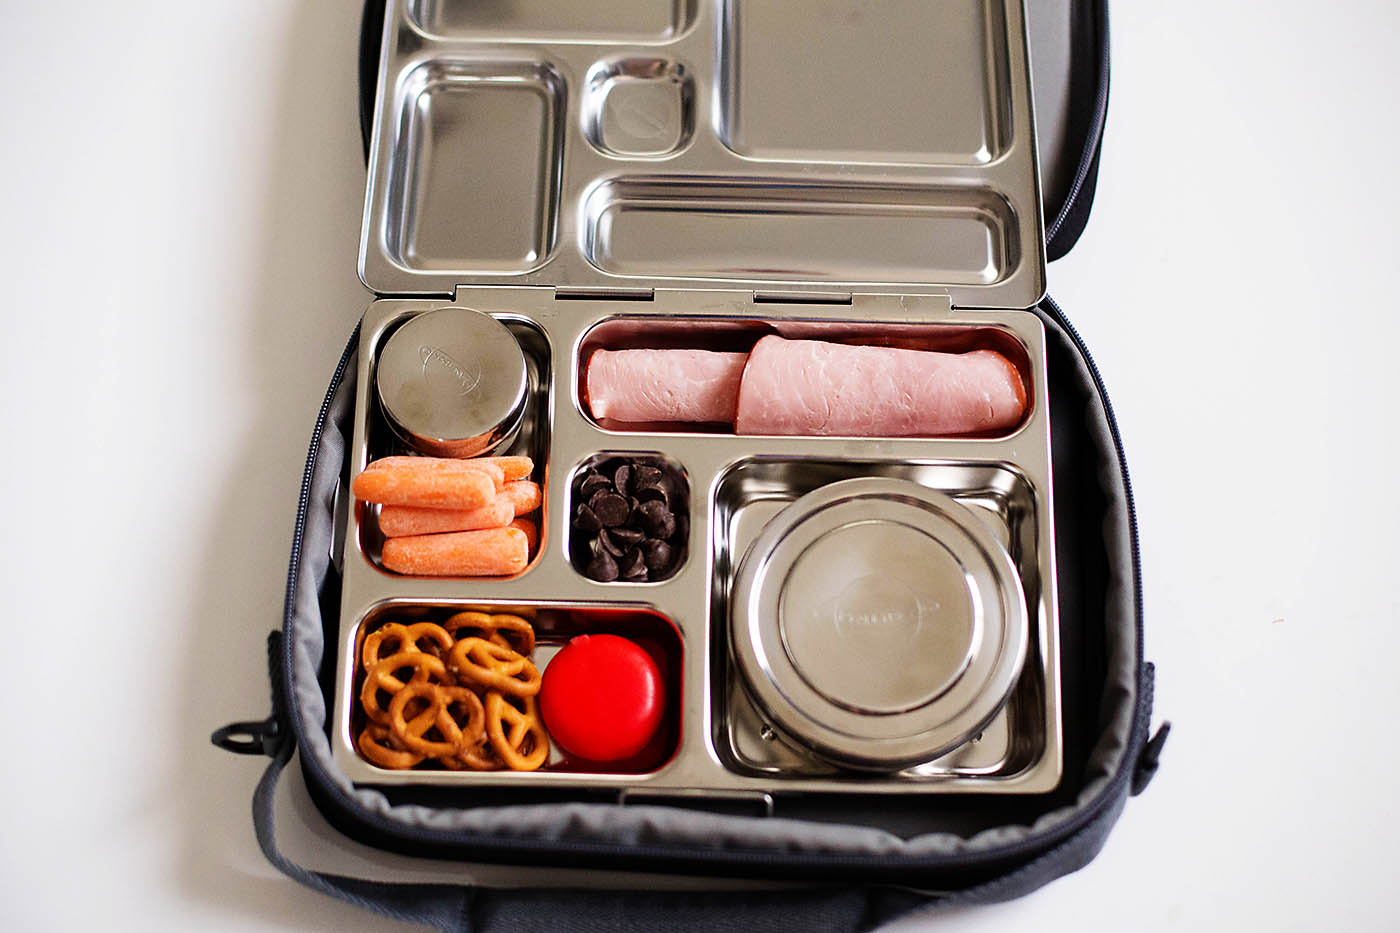 Places to use a lunchbox beyond school